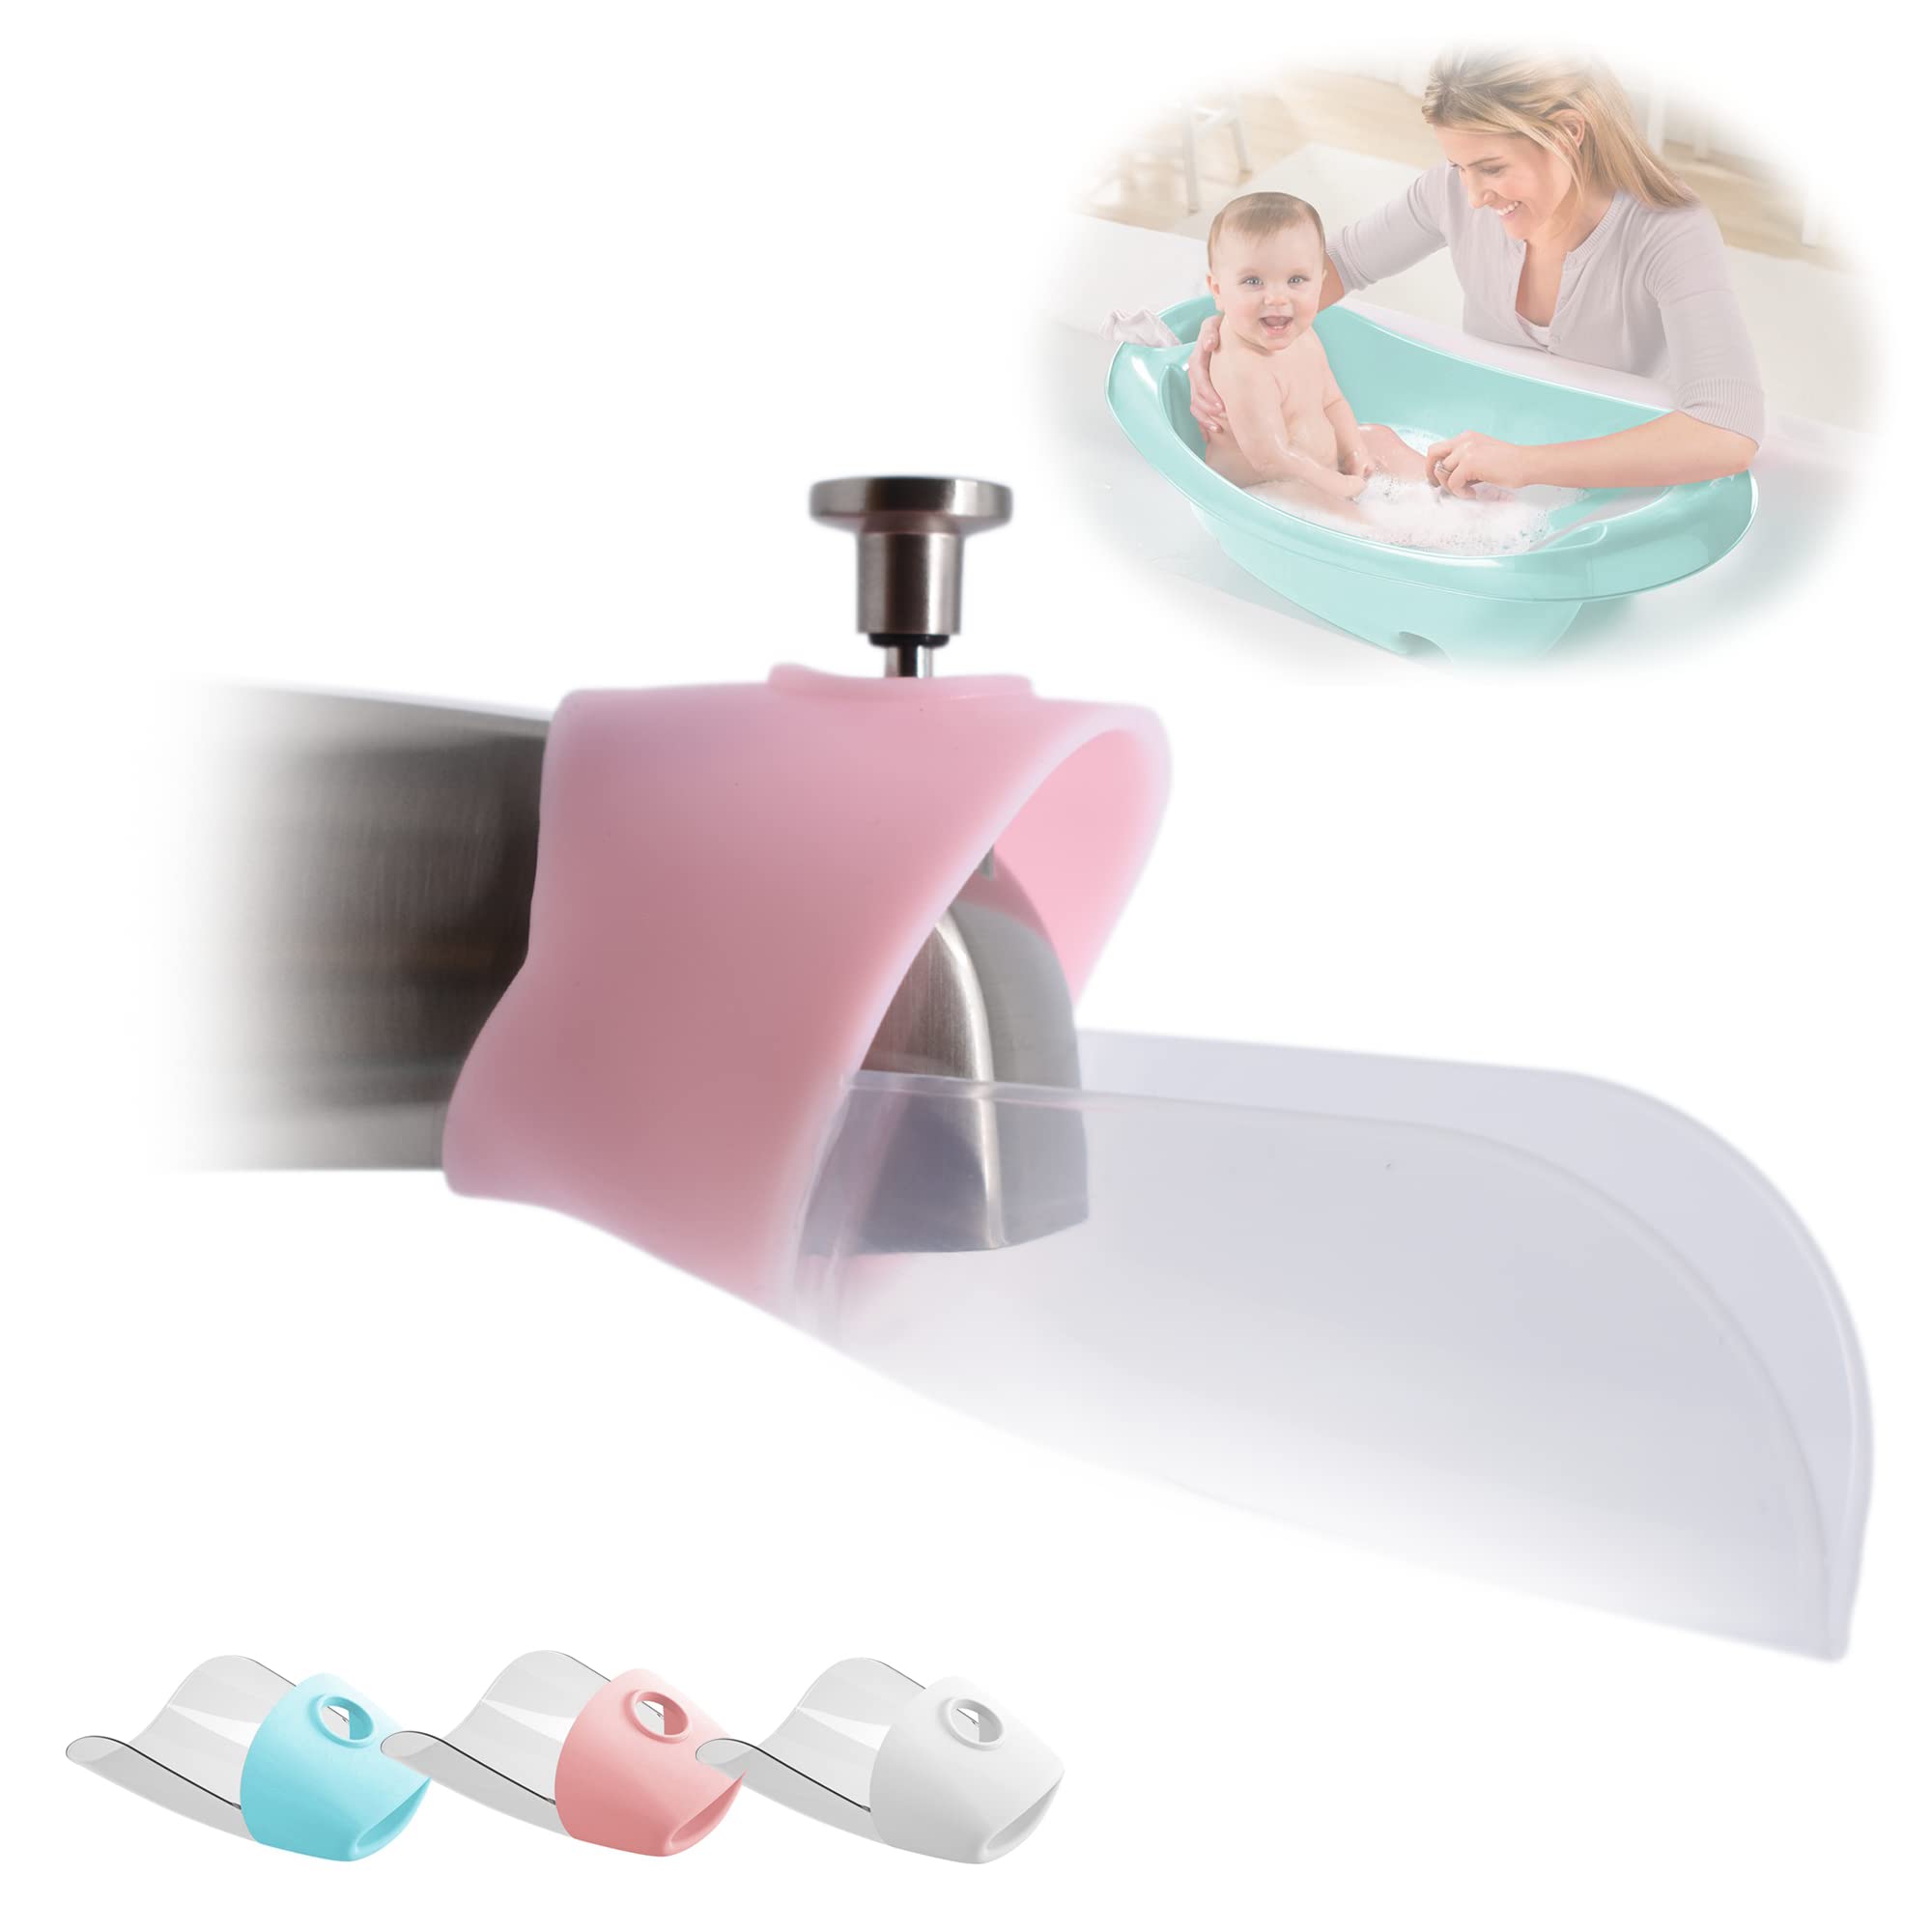 Ooze Baby Bath Helper - Bath Tub Faucet Extender - guides Water Directly from Faucet to Baby Bath Tub Without Excessive Water Waste a